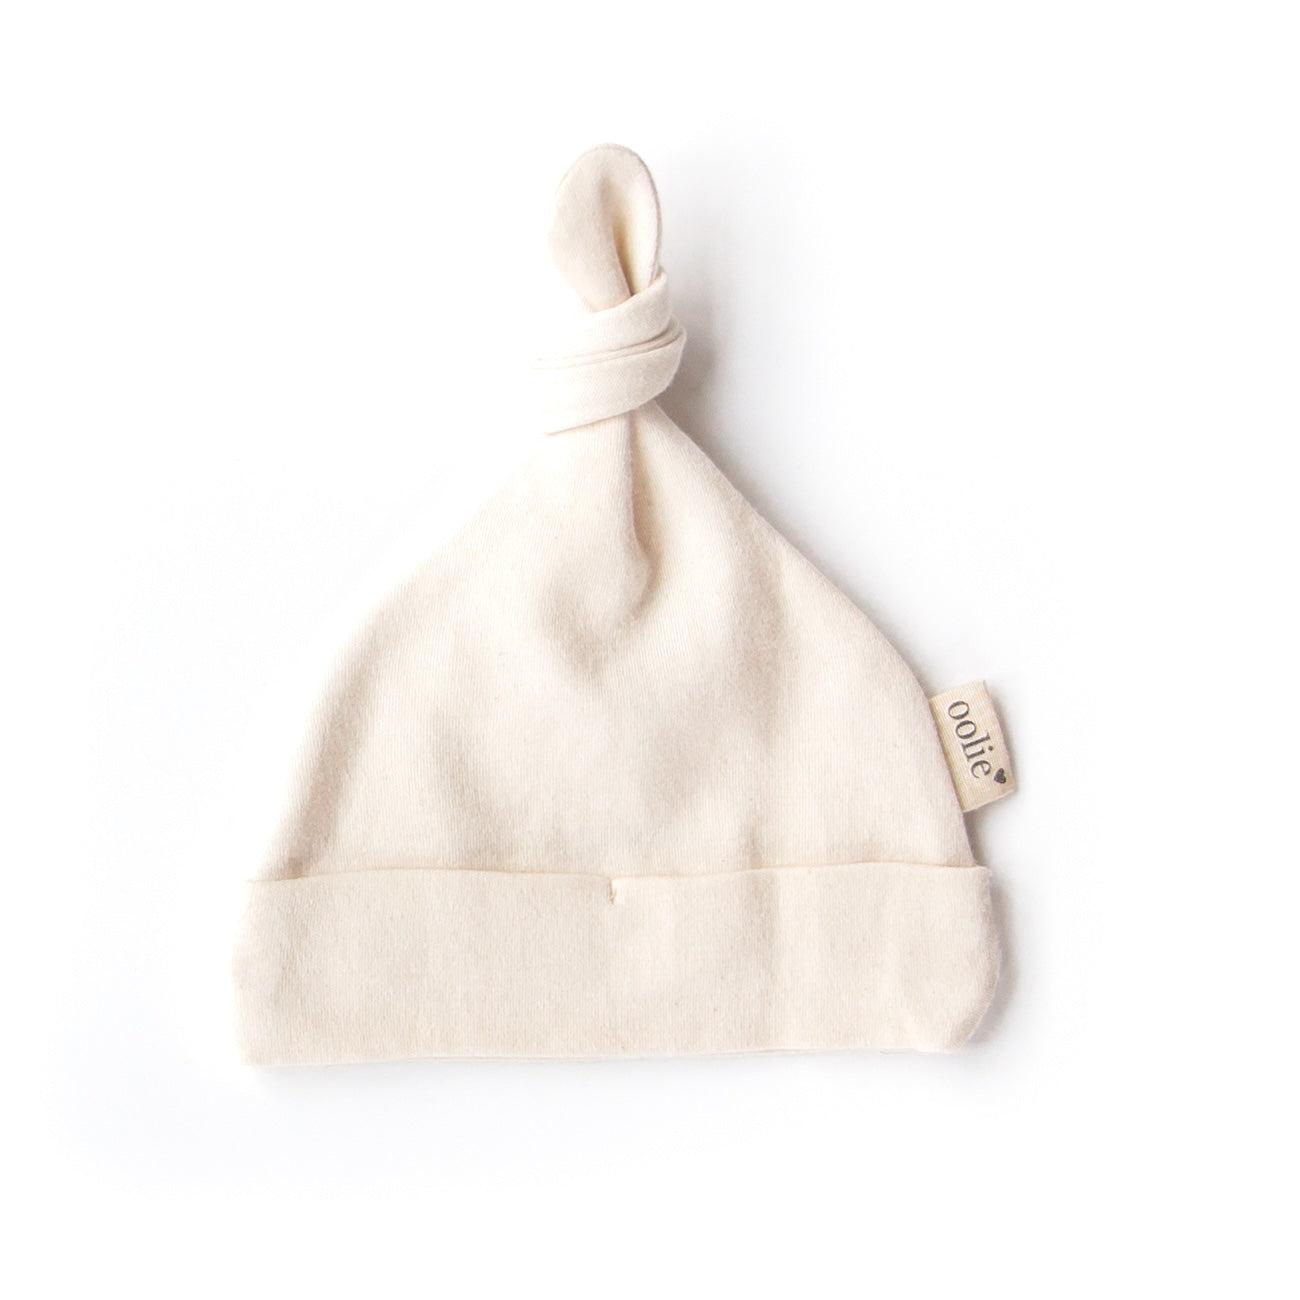 A natural Oolie organic cotton top knot baby hat, unprinted, revealing its natural, undyed, unbleached color.